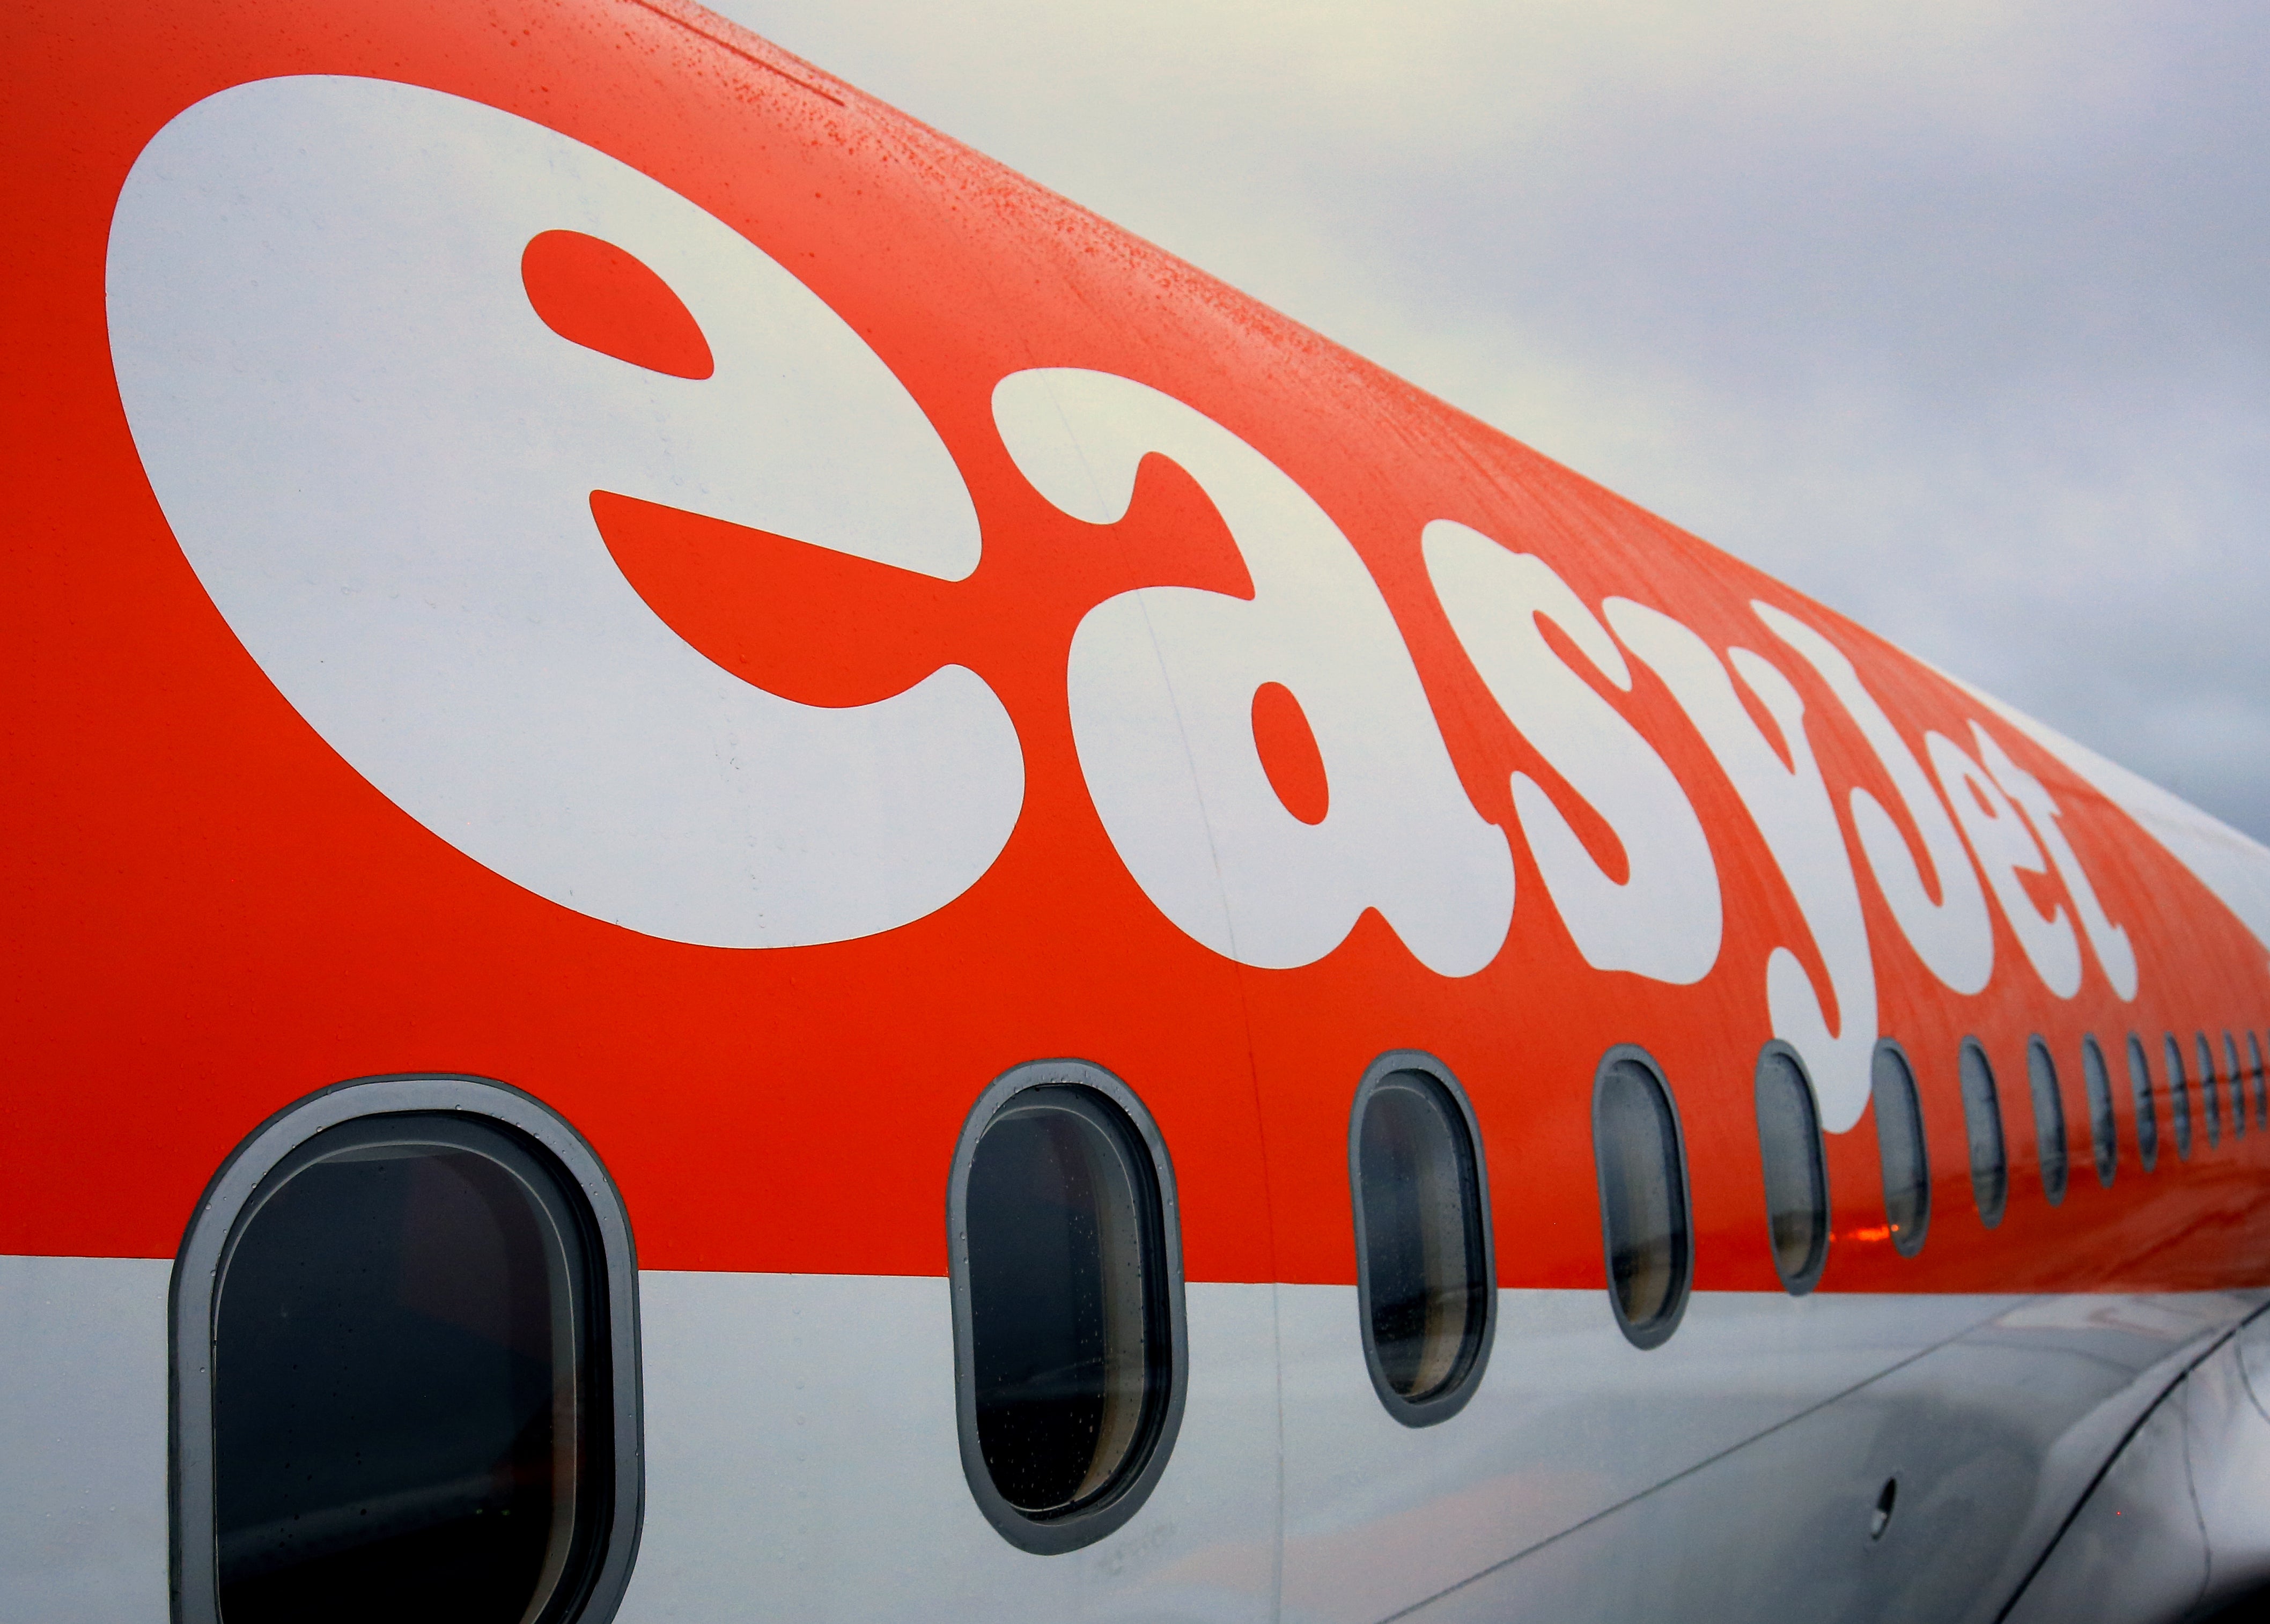 EasyJet’s chief operating officer Peter Bellew has resigned amid growing anger over flight disruption (Gareth Fuller/PA)